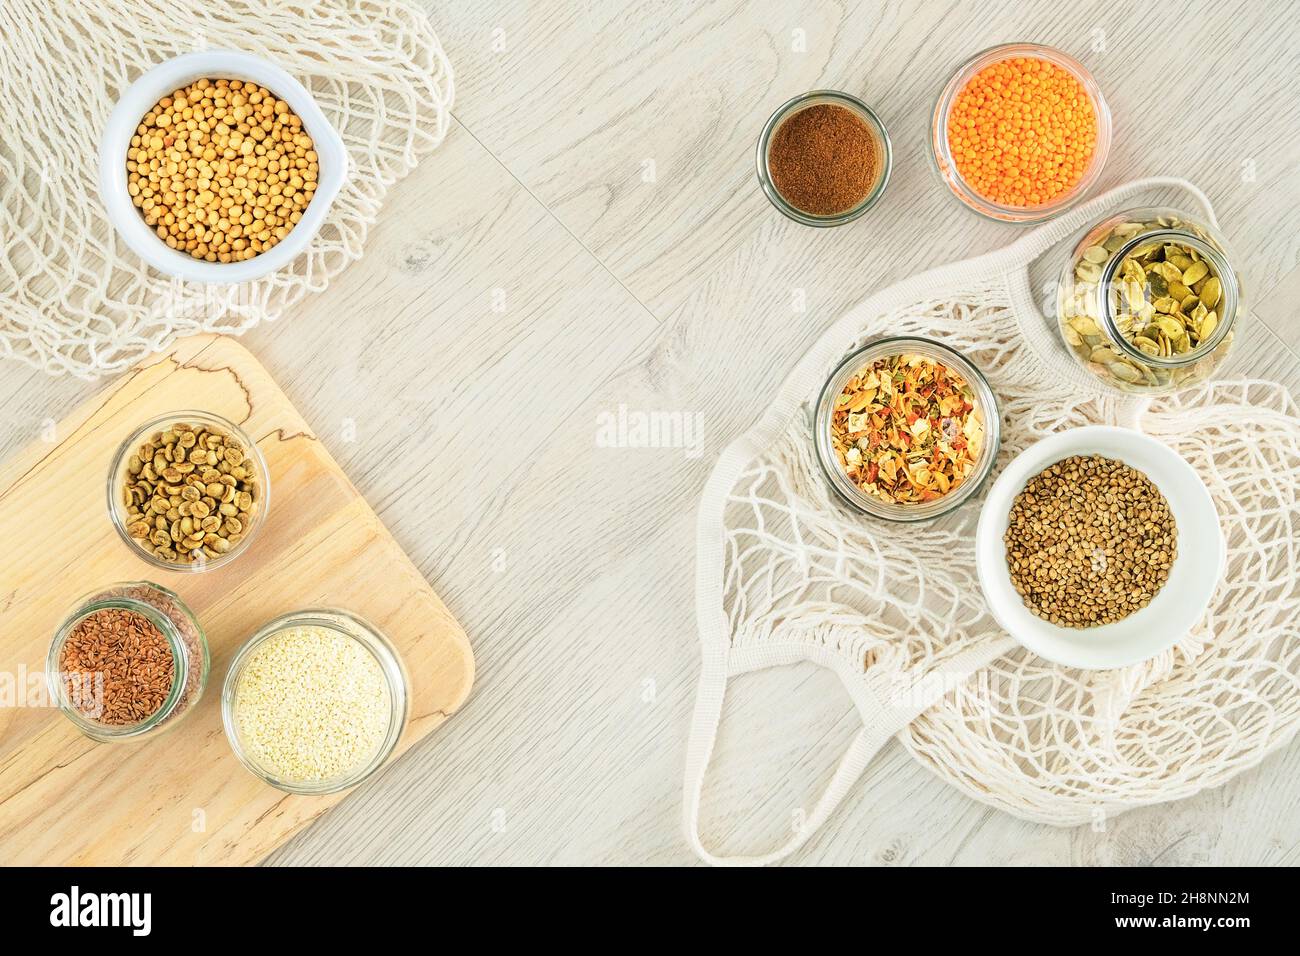 Zero waste shopping and sustanable lifestyle concept. Various farm organic products in glass jars on a light wooden background. Copy space, top view. Stock Photo